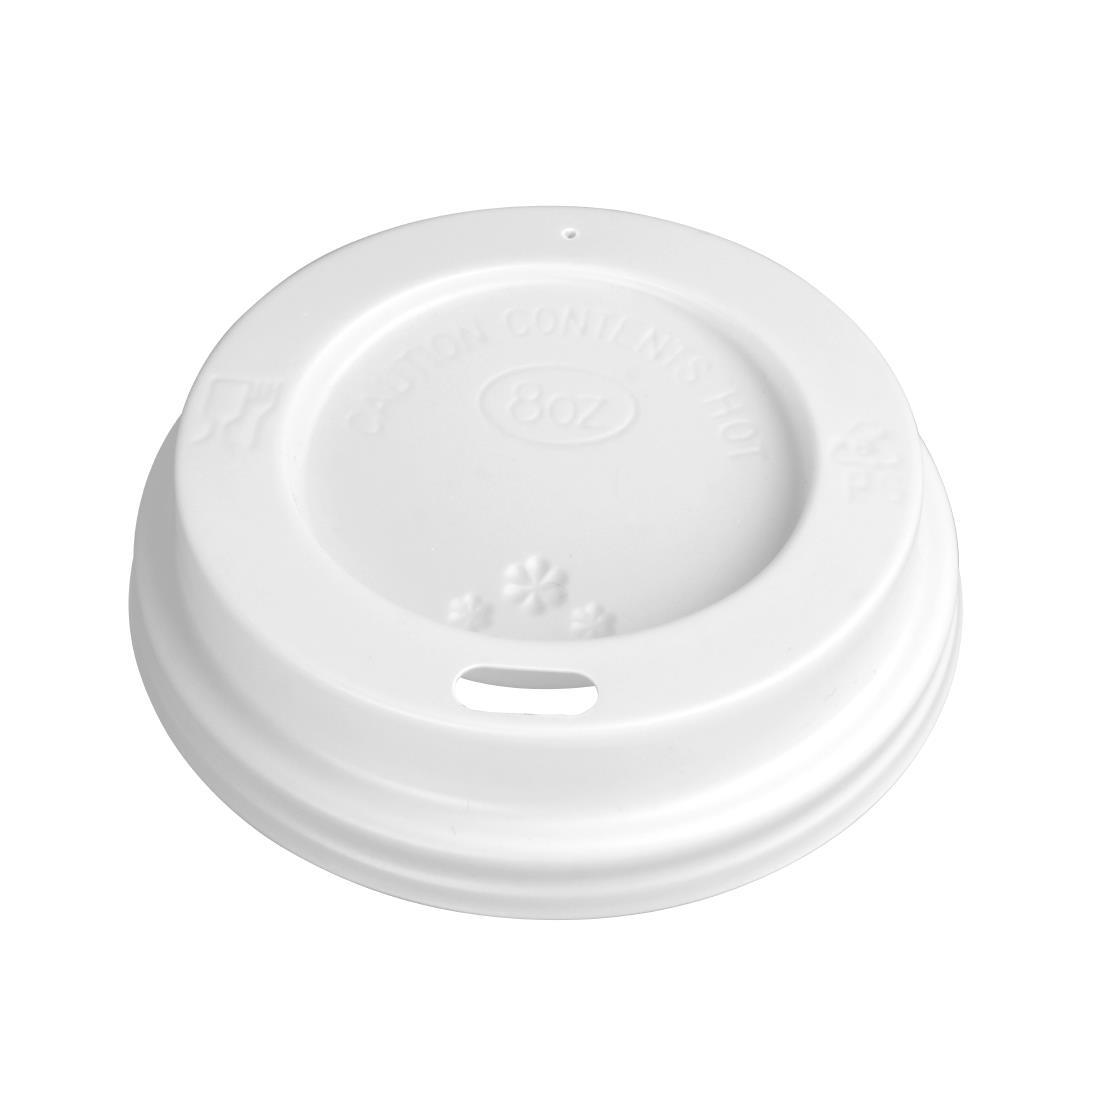 Fiesta Recyclable Coffee Cup Lids White 225ml / 8oz (Pack of 50) - CE263  - 2